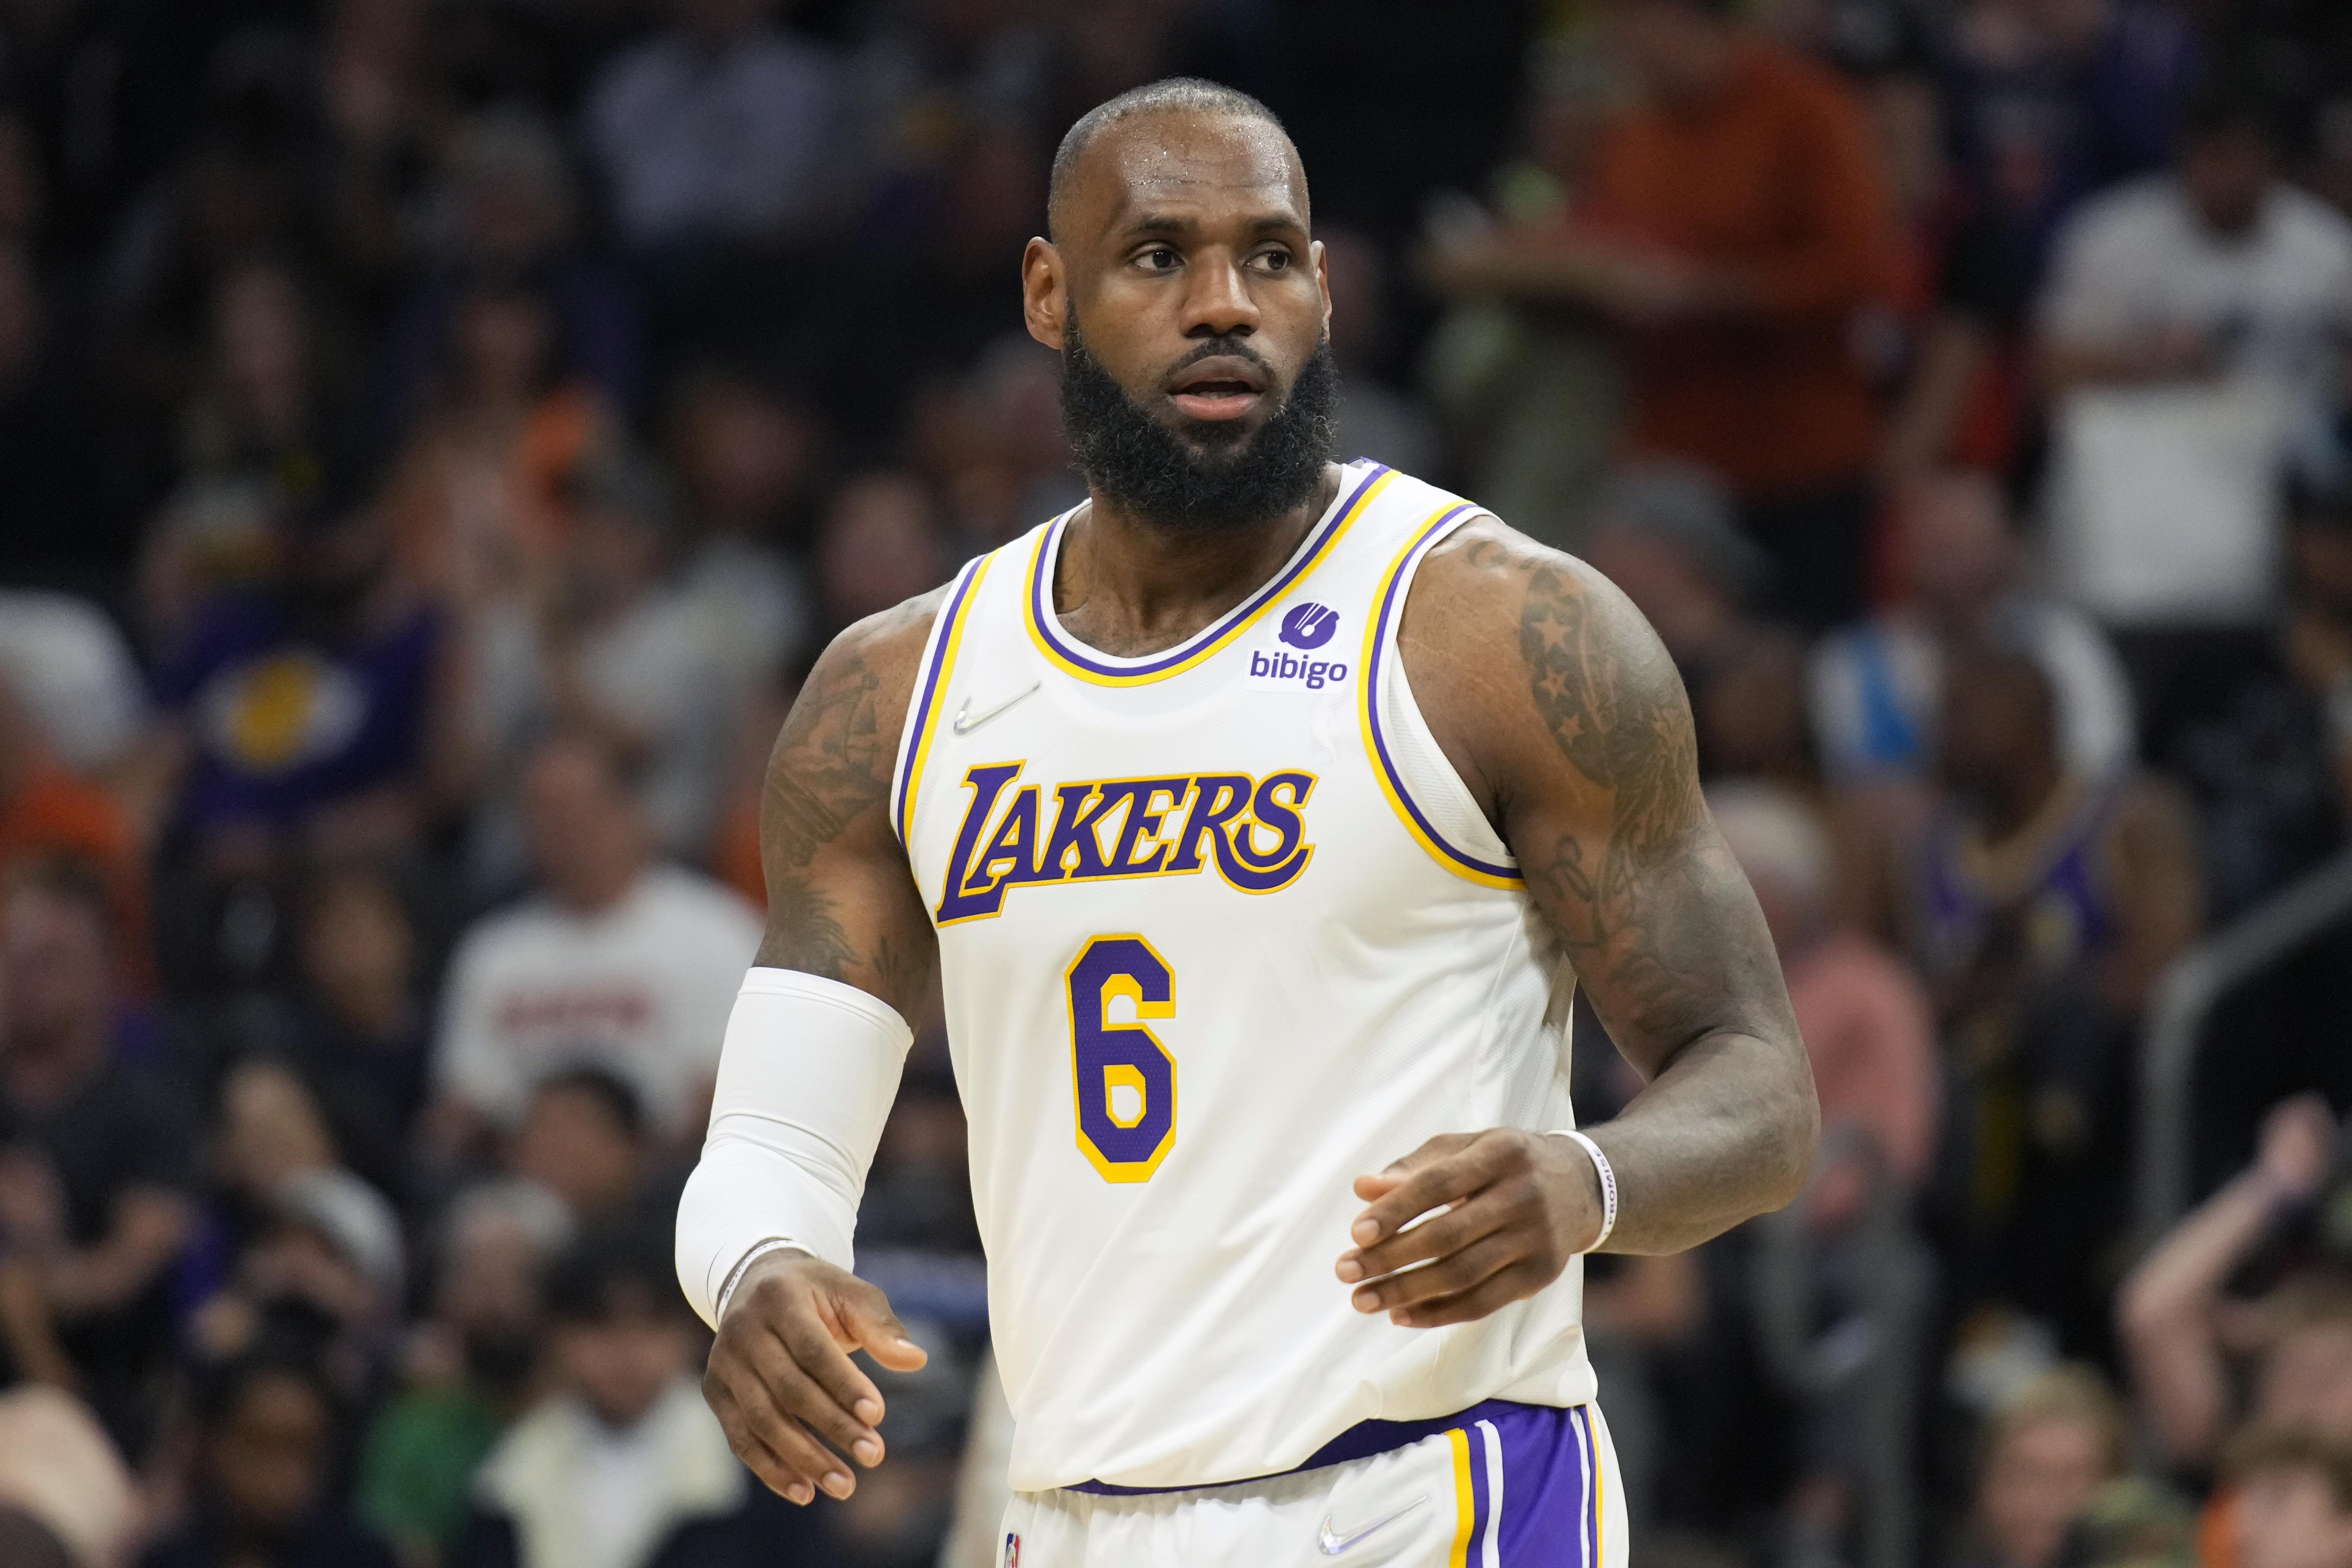 LeBron James becomes first NBA player to total 10,000 points, rebounds,  assists - Washington Times